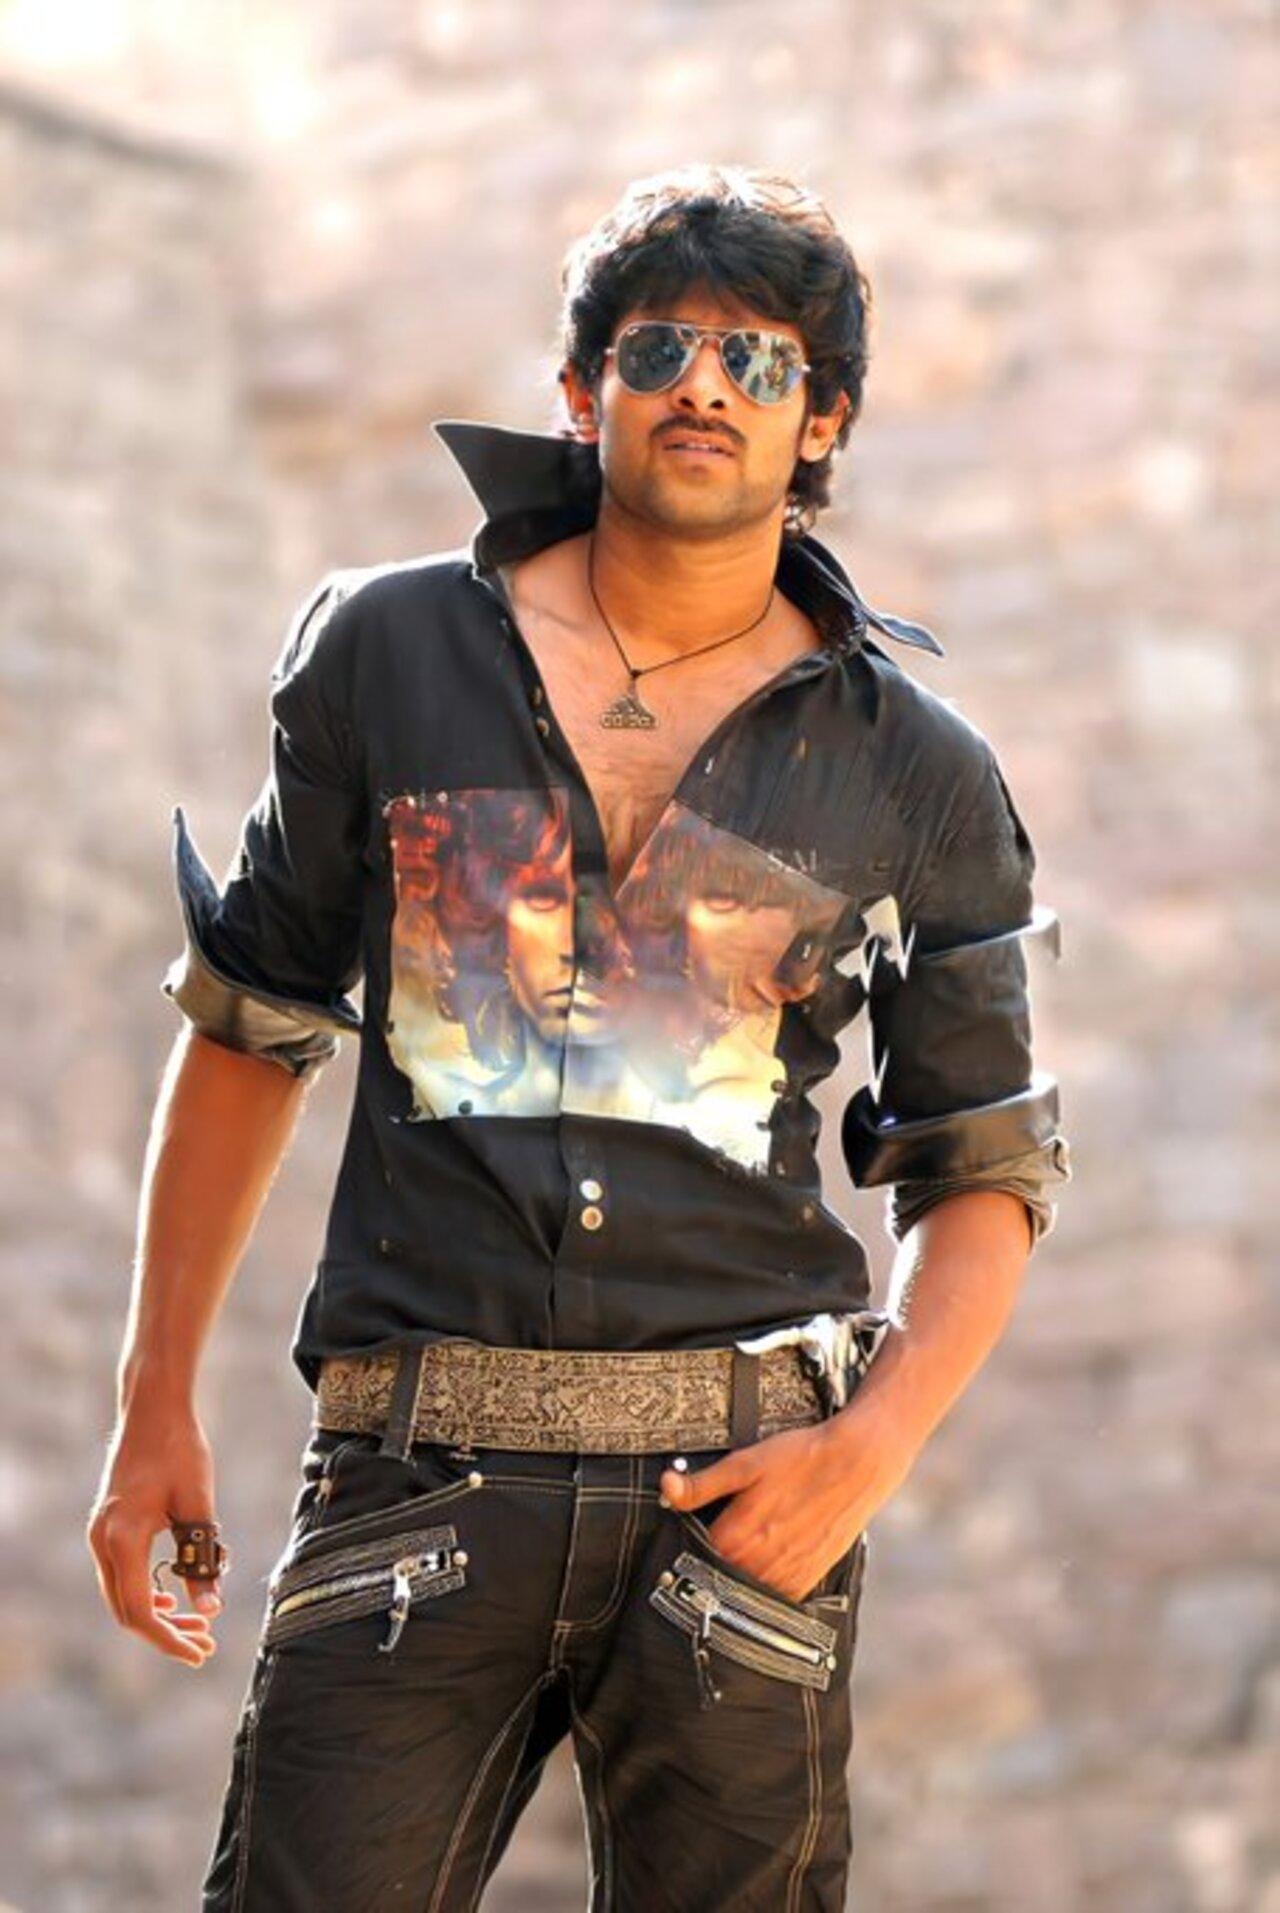 In 2008, Prabhas once again collaborated with Trisha for Puri Jaggannadh's action-comedy film 'Bujjigadu'. The film released to positive reviews and was later remade in Bangladesh as Pagla Deewana with Pori Moni & Shahriaz